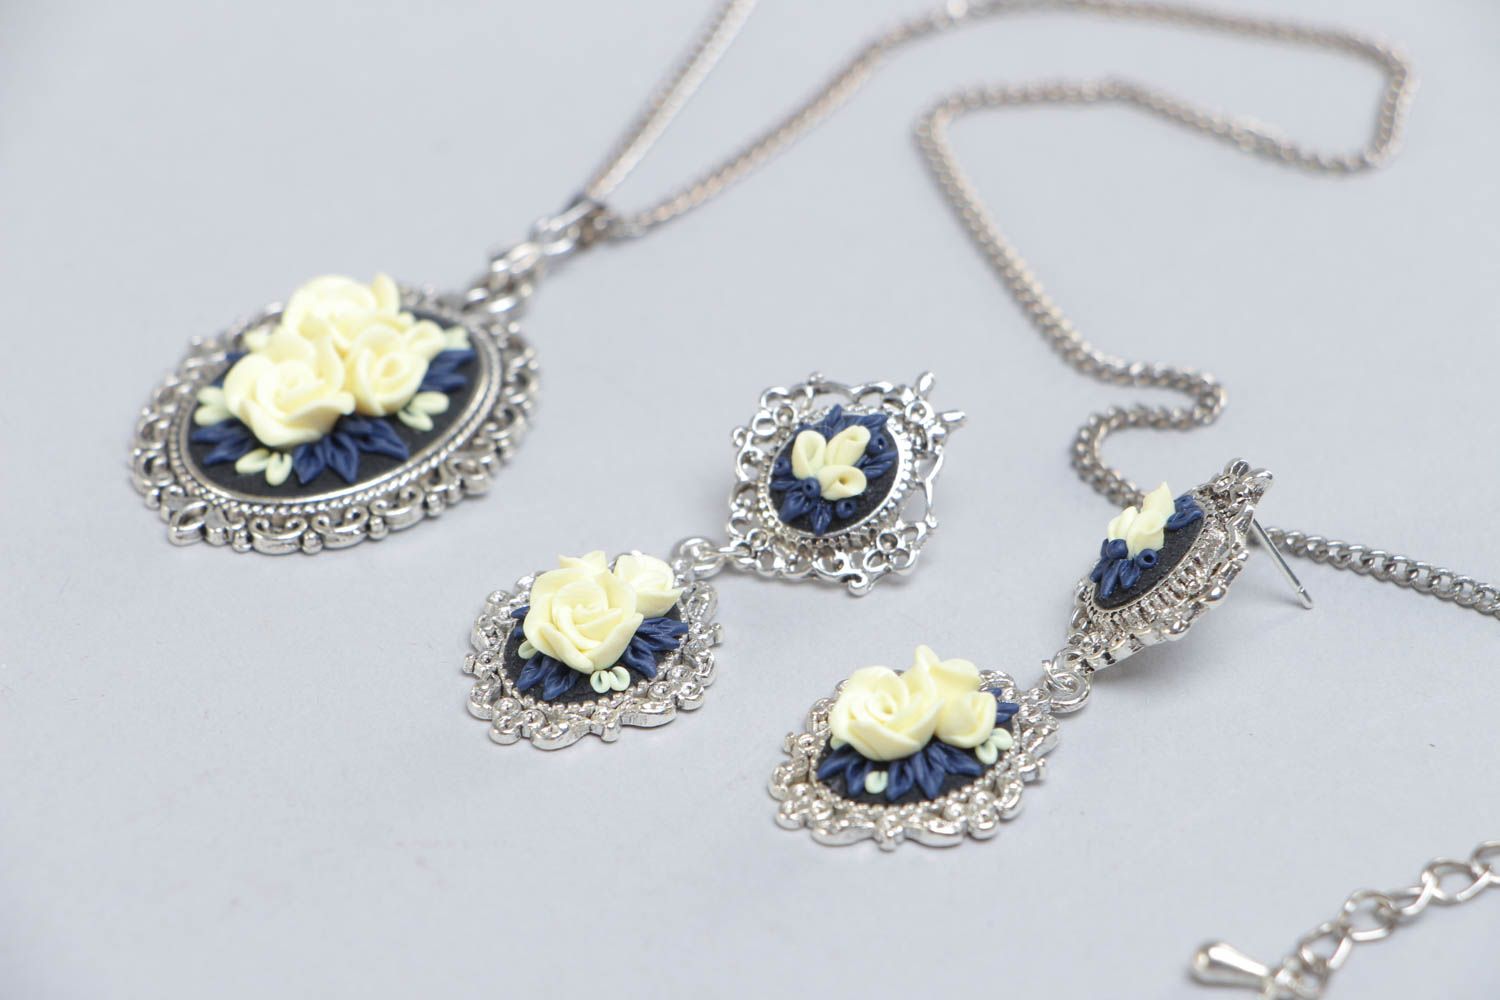 Handmade designer polymer clay jewelry set 2 items necklace and earrings Vanilla Roses photo 3